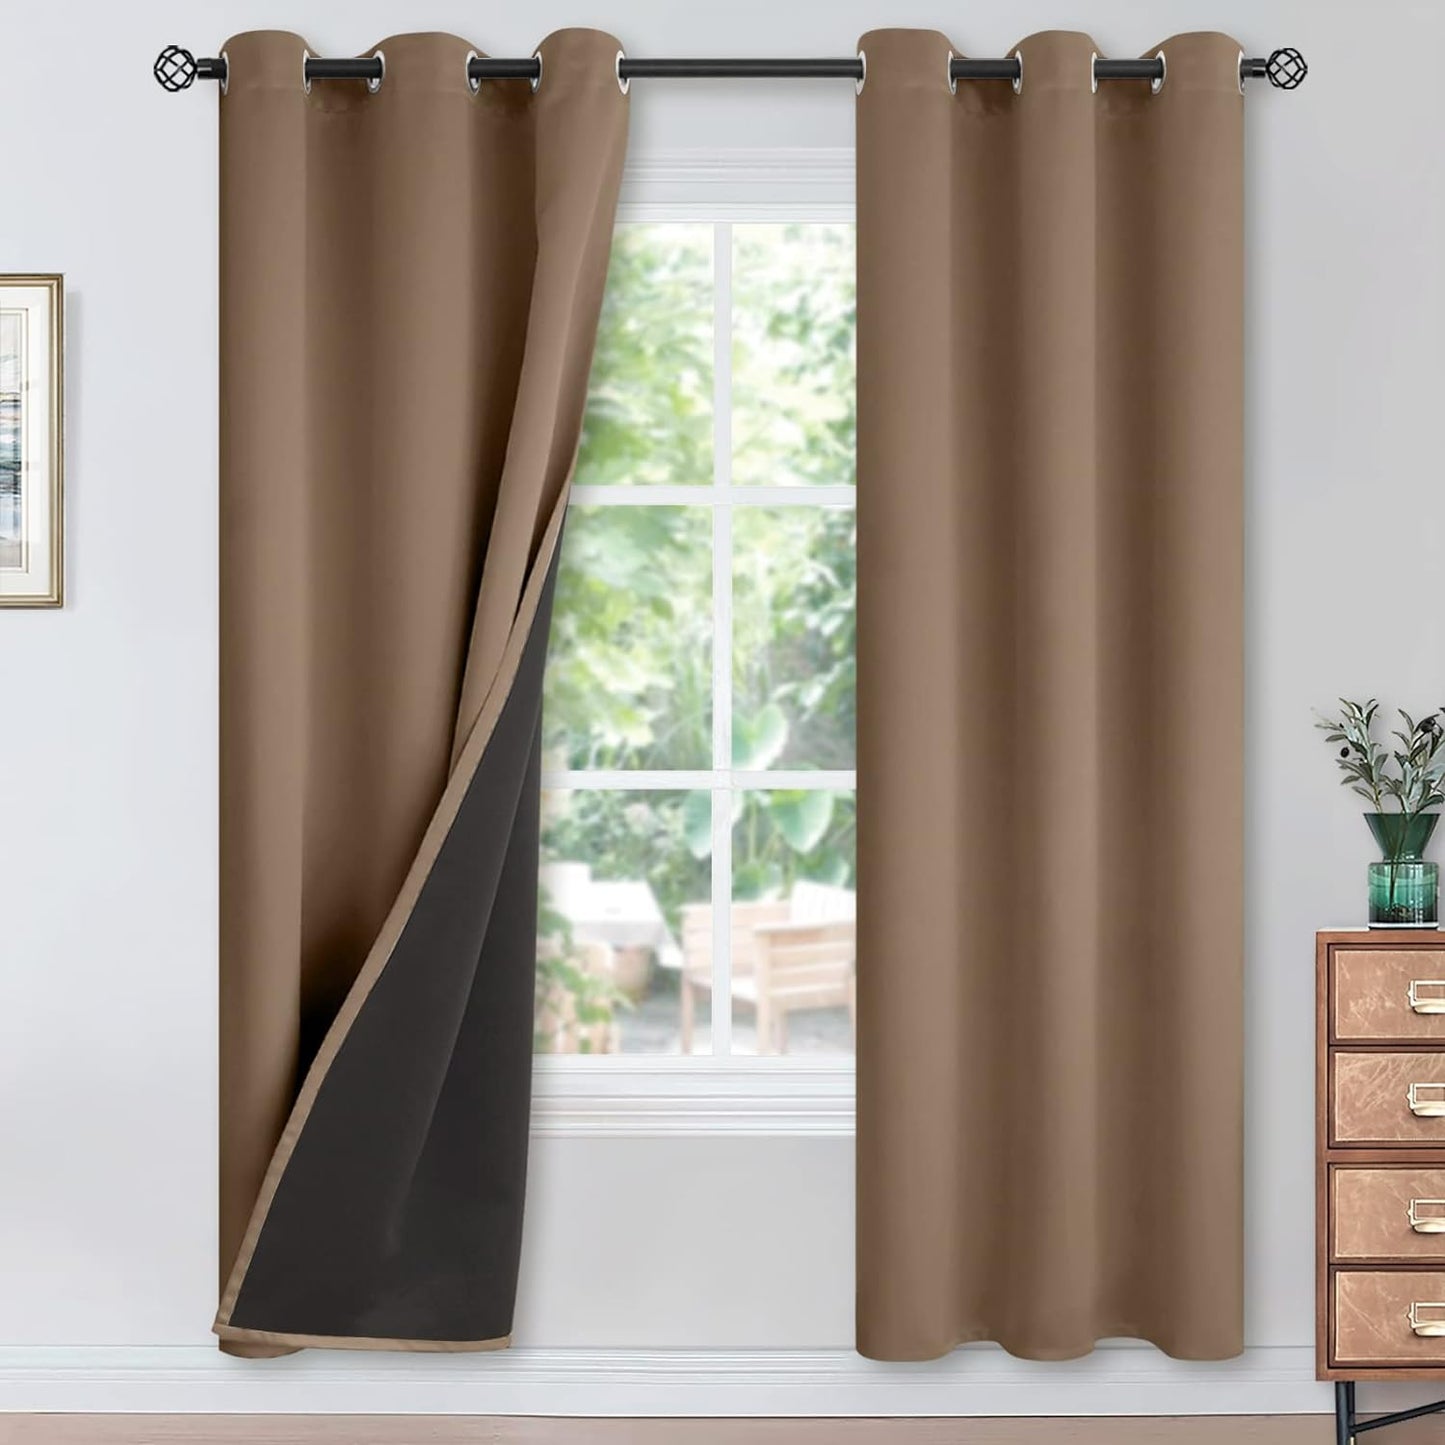 Youngstex Black 100% Blackout Curtains 63 Inches for Bedroom Thermal Insulated Total Room Darkening Curtains for Living Room Window with Black Back Grommet, 2 Panels, 42 X 63 Inch  YoungsTex Taupe 42W X 84L 